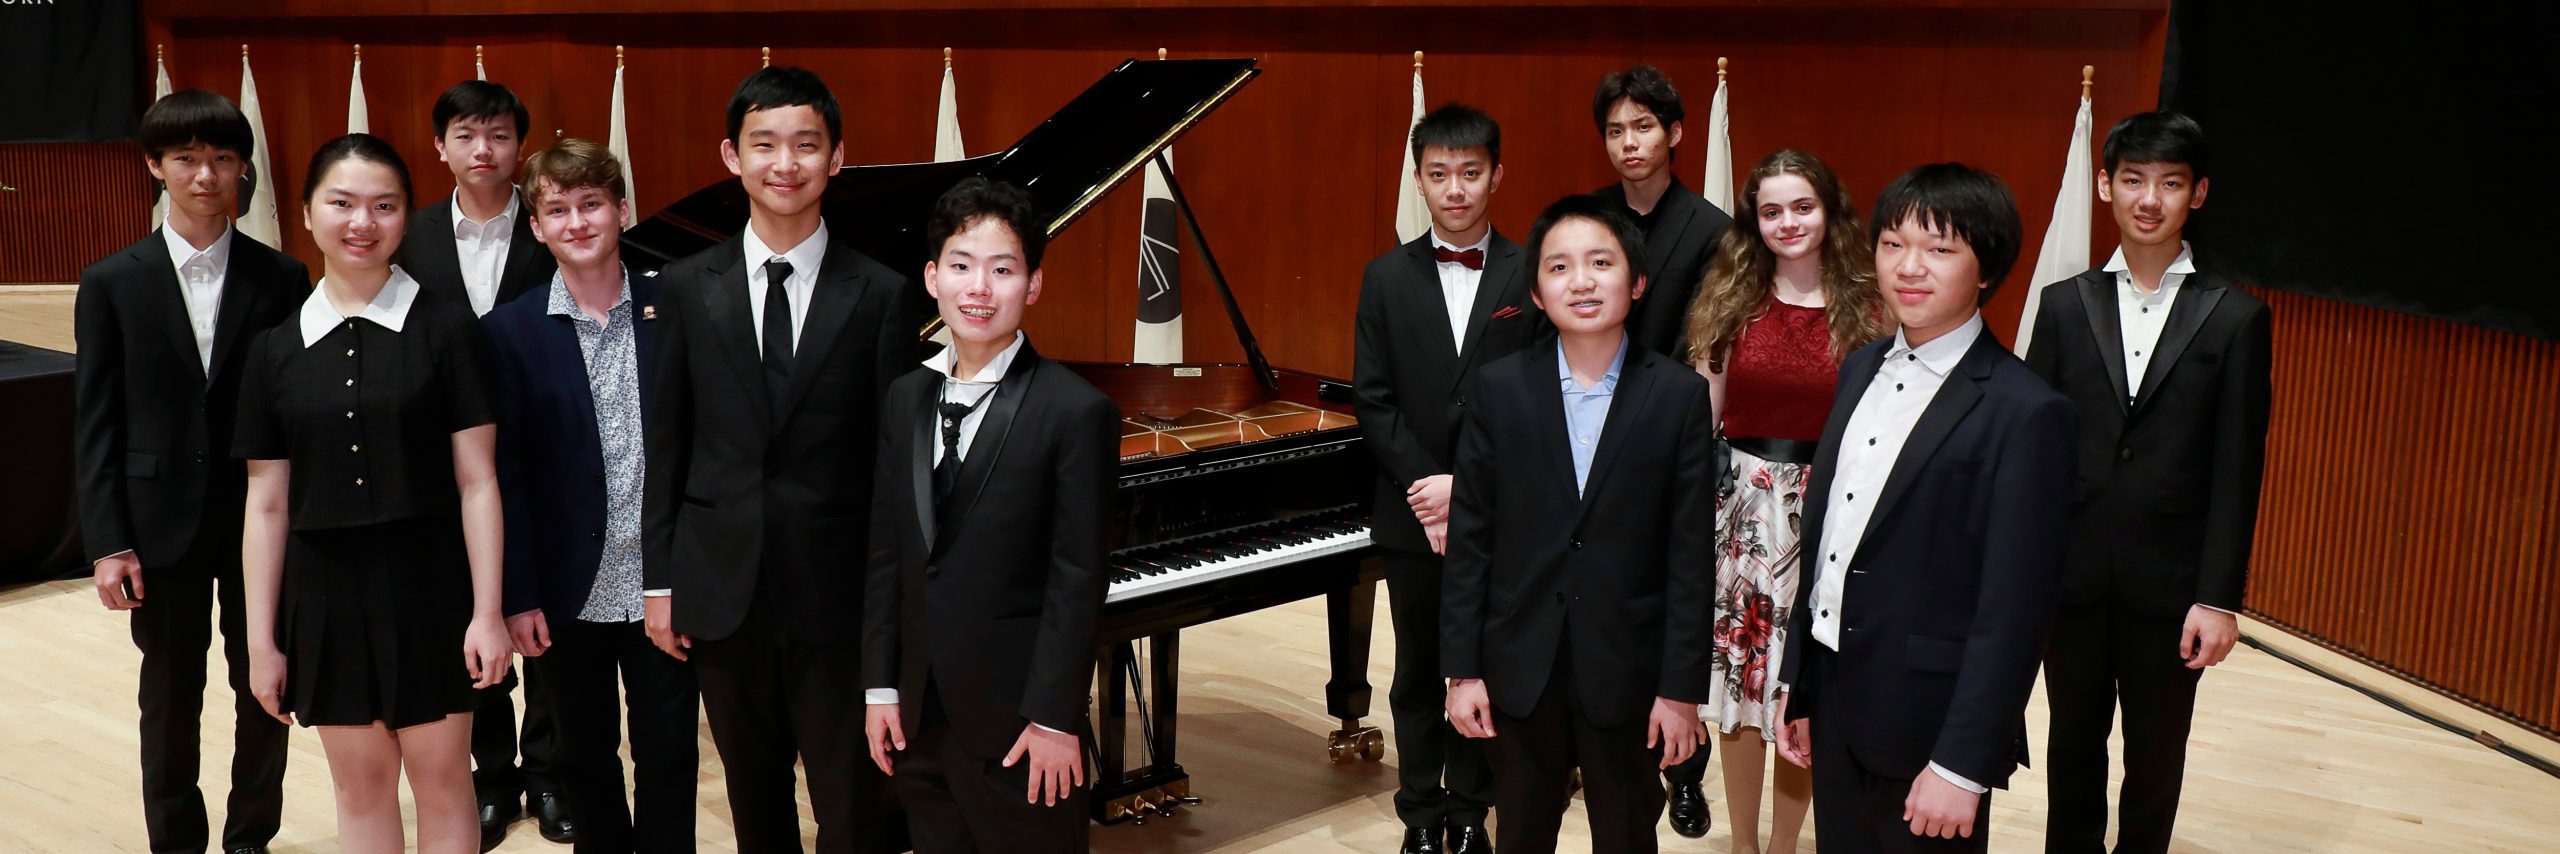 QUARTERFINALISTS ANNOUNCED FOR THE 2023 CLIBURN INTERNATIONAL JUNIOR PIANO COMPETITION